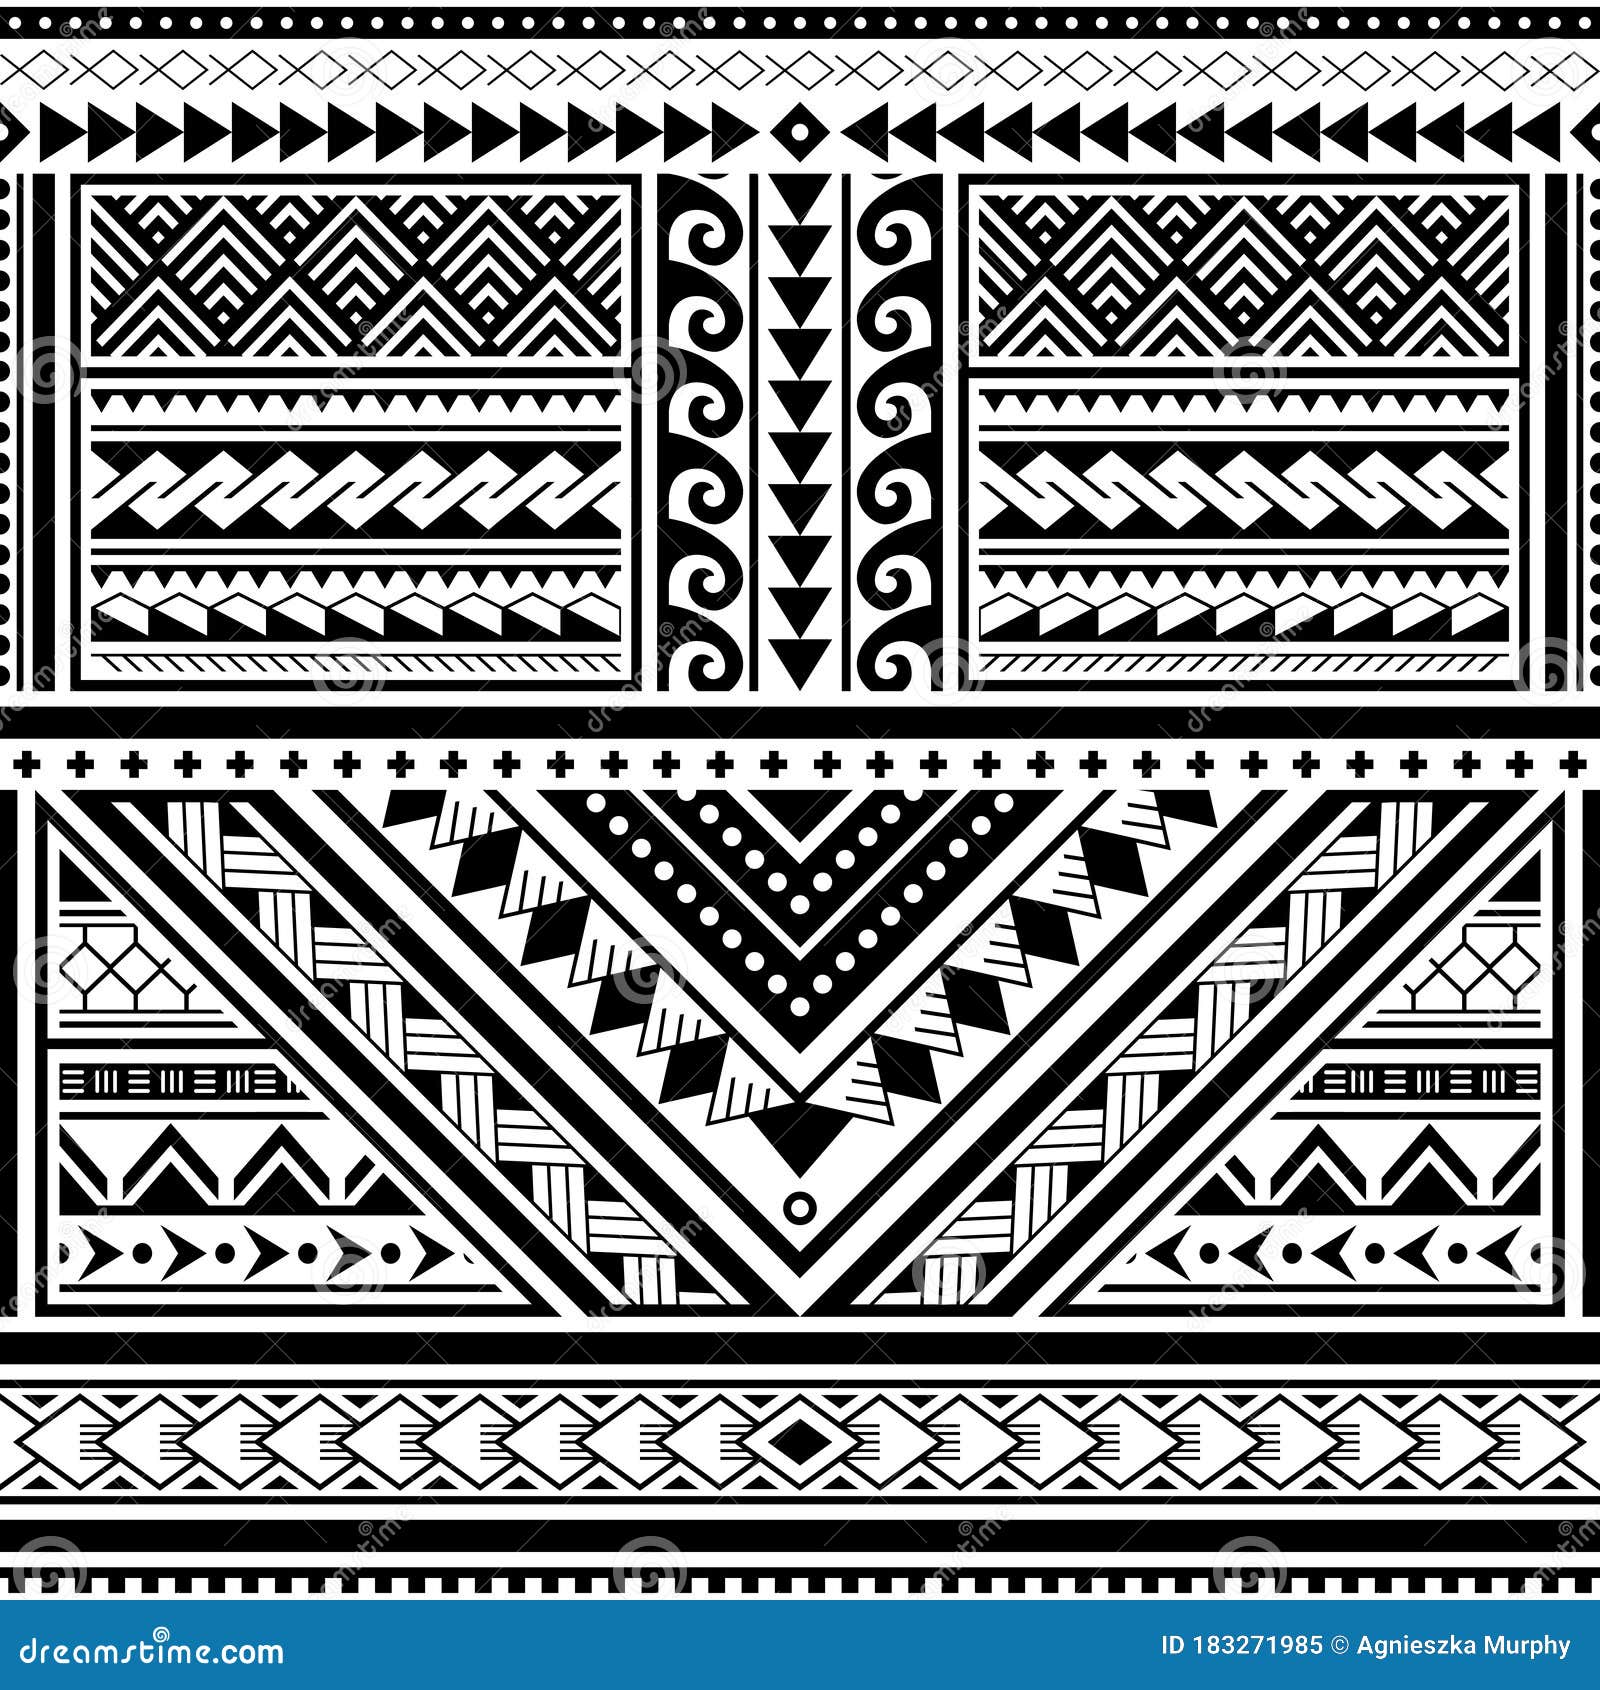 Polynesian Tattoo Seamless Vector Pattern, Hawaiian Tribal Design Inspired  by Art Traditional Geometric Art from Islands on Pacifi Stock Vector -  Illustration of decorative, decoration: 183271985